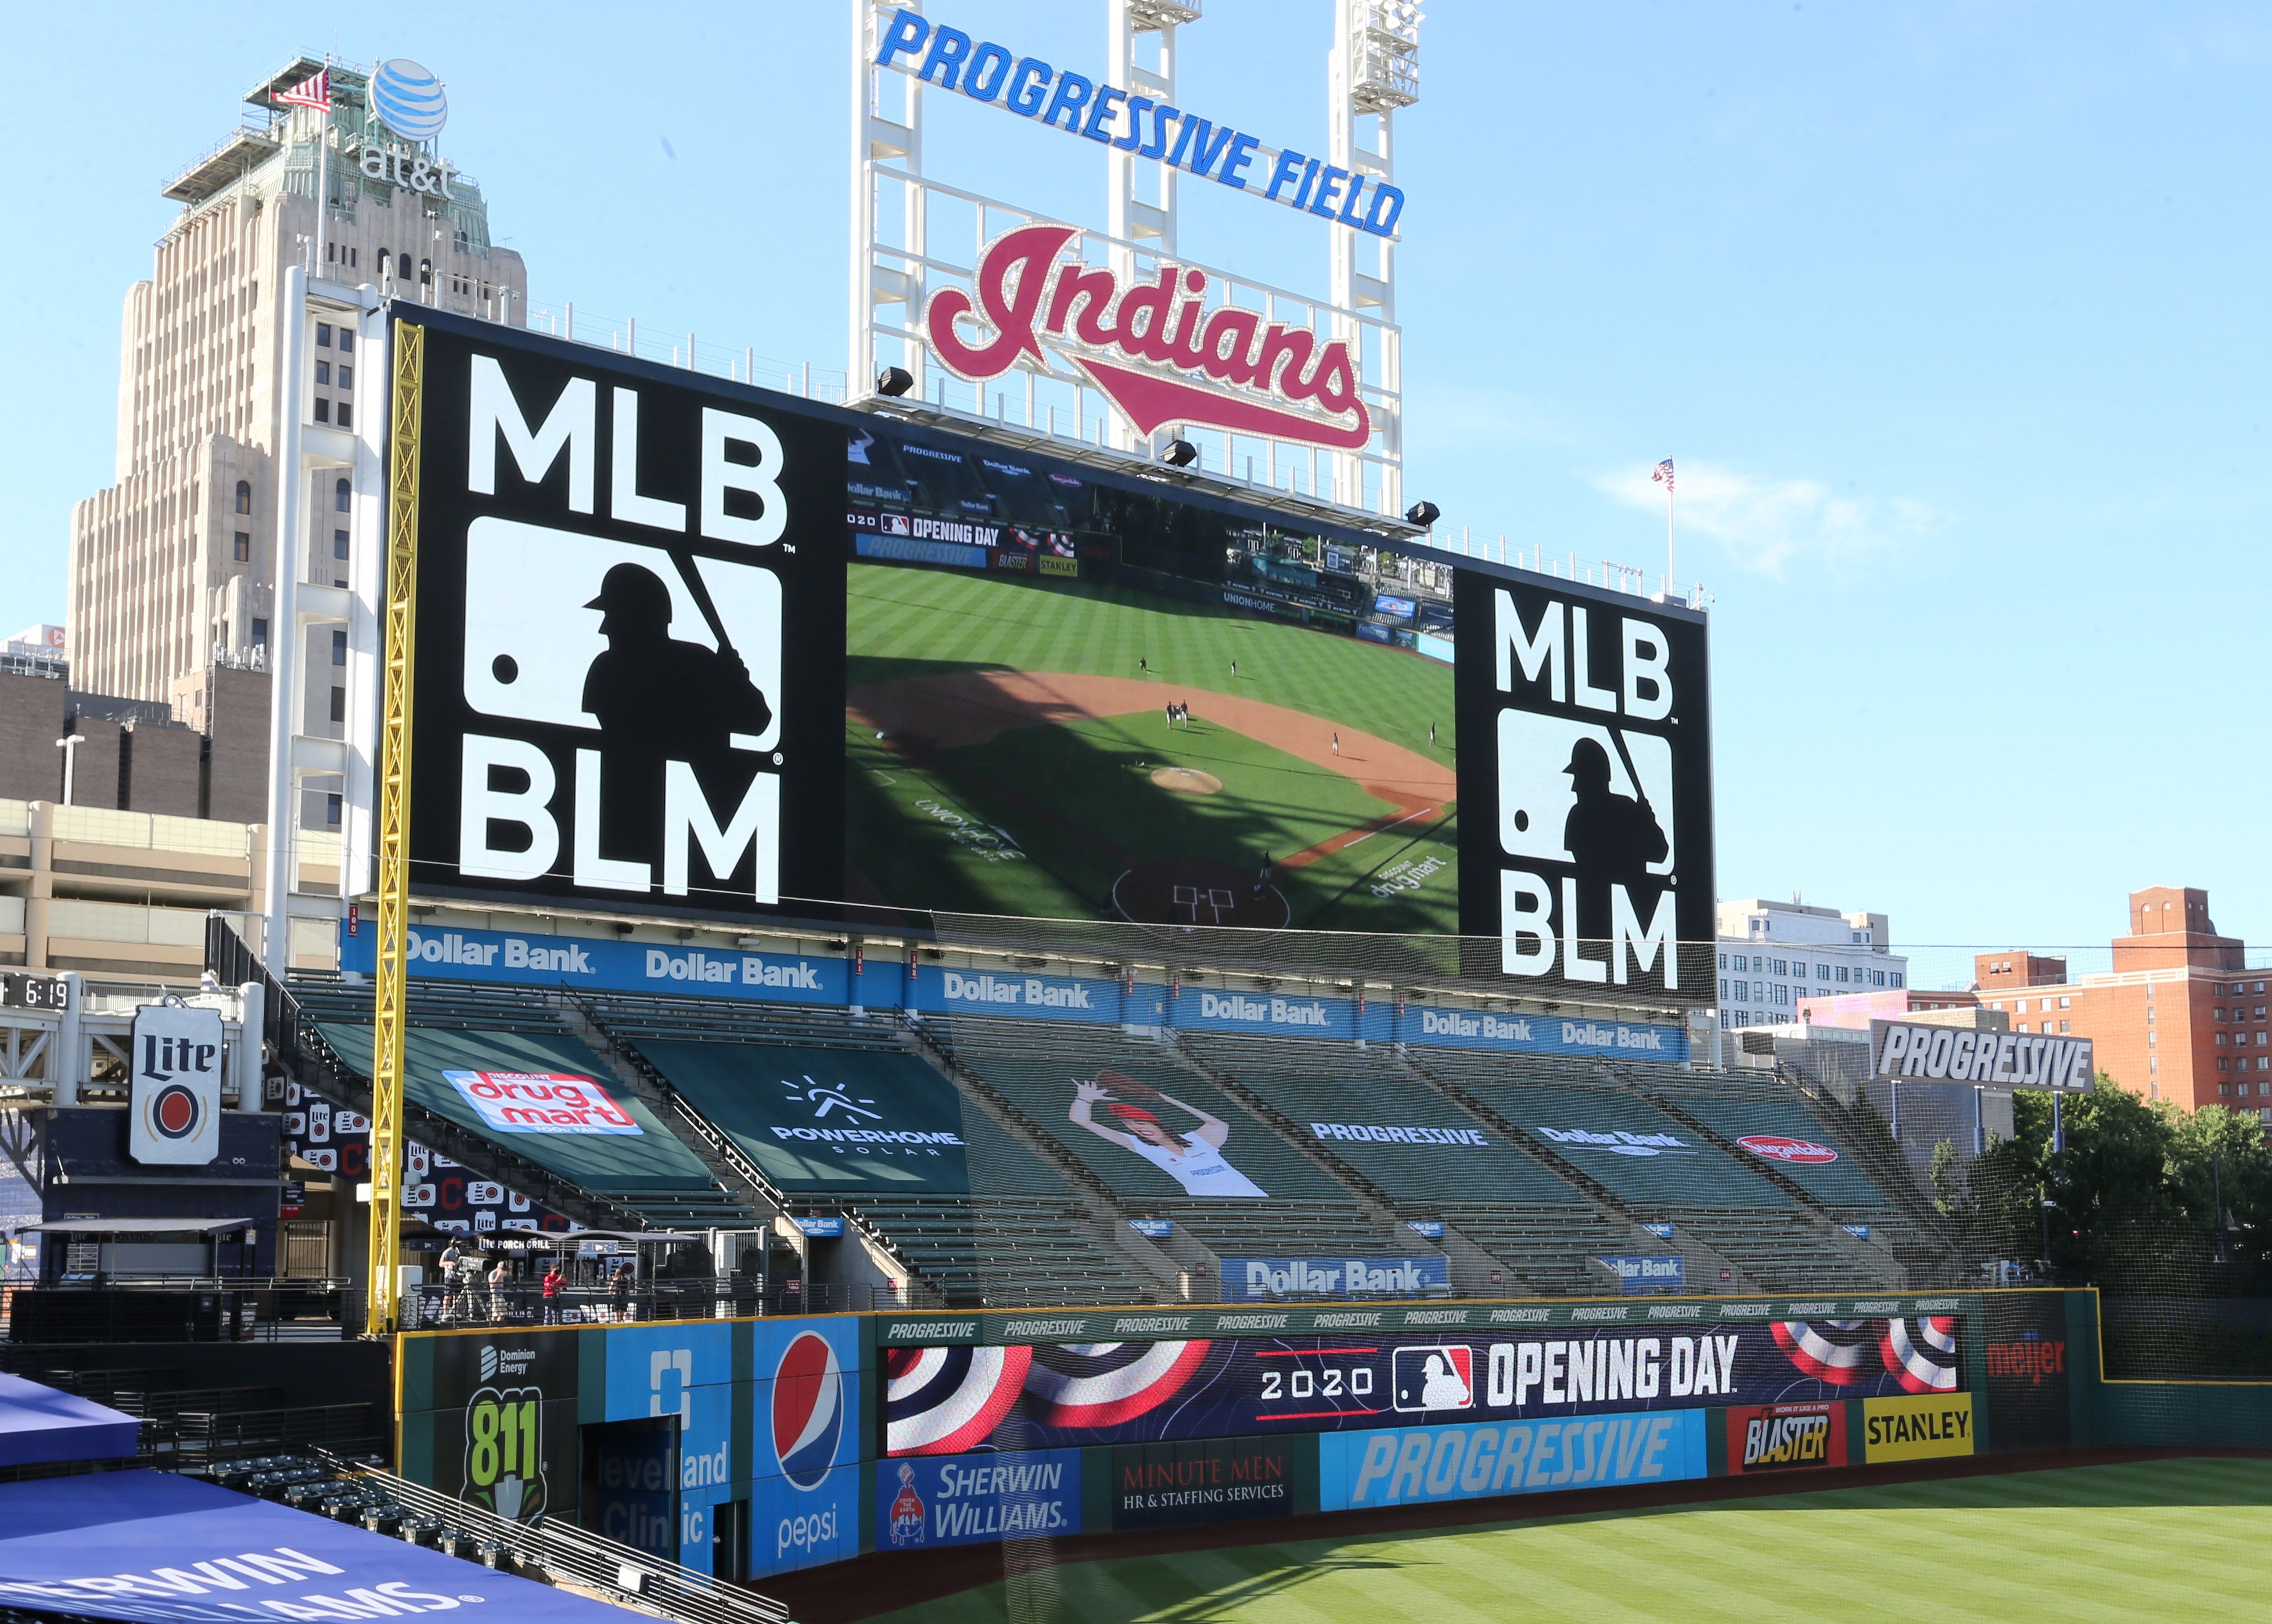 MLB: Cleveland 'The Baseball Team' Dropping The Indians Name